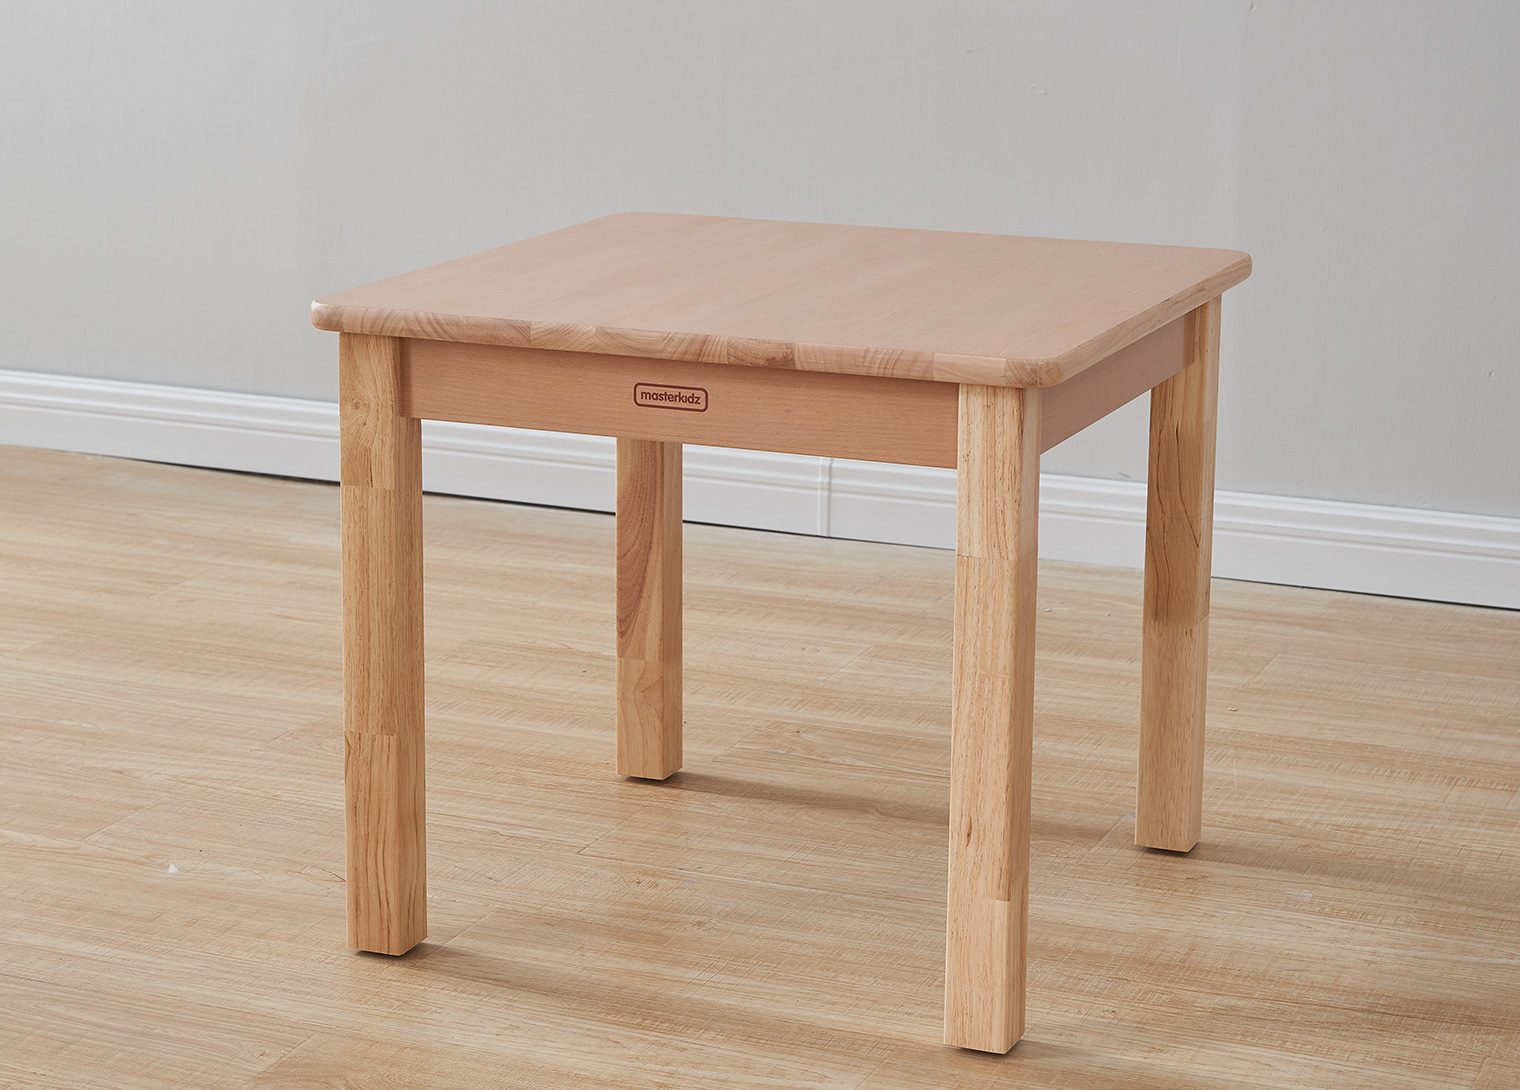 Forest School - 535H Square Table